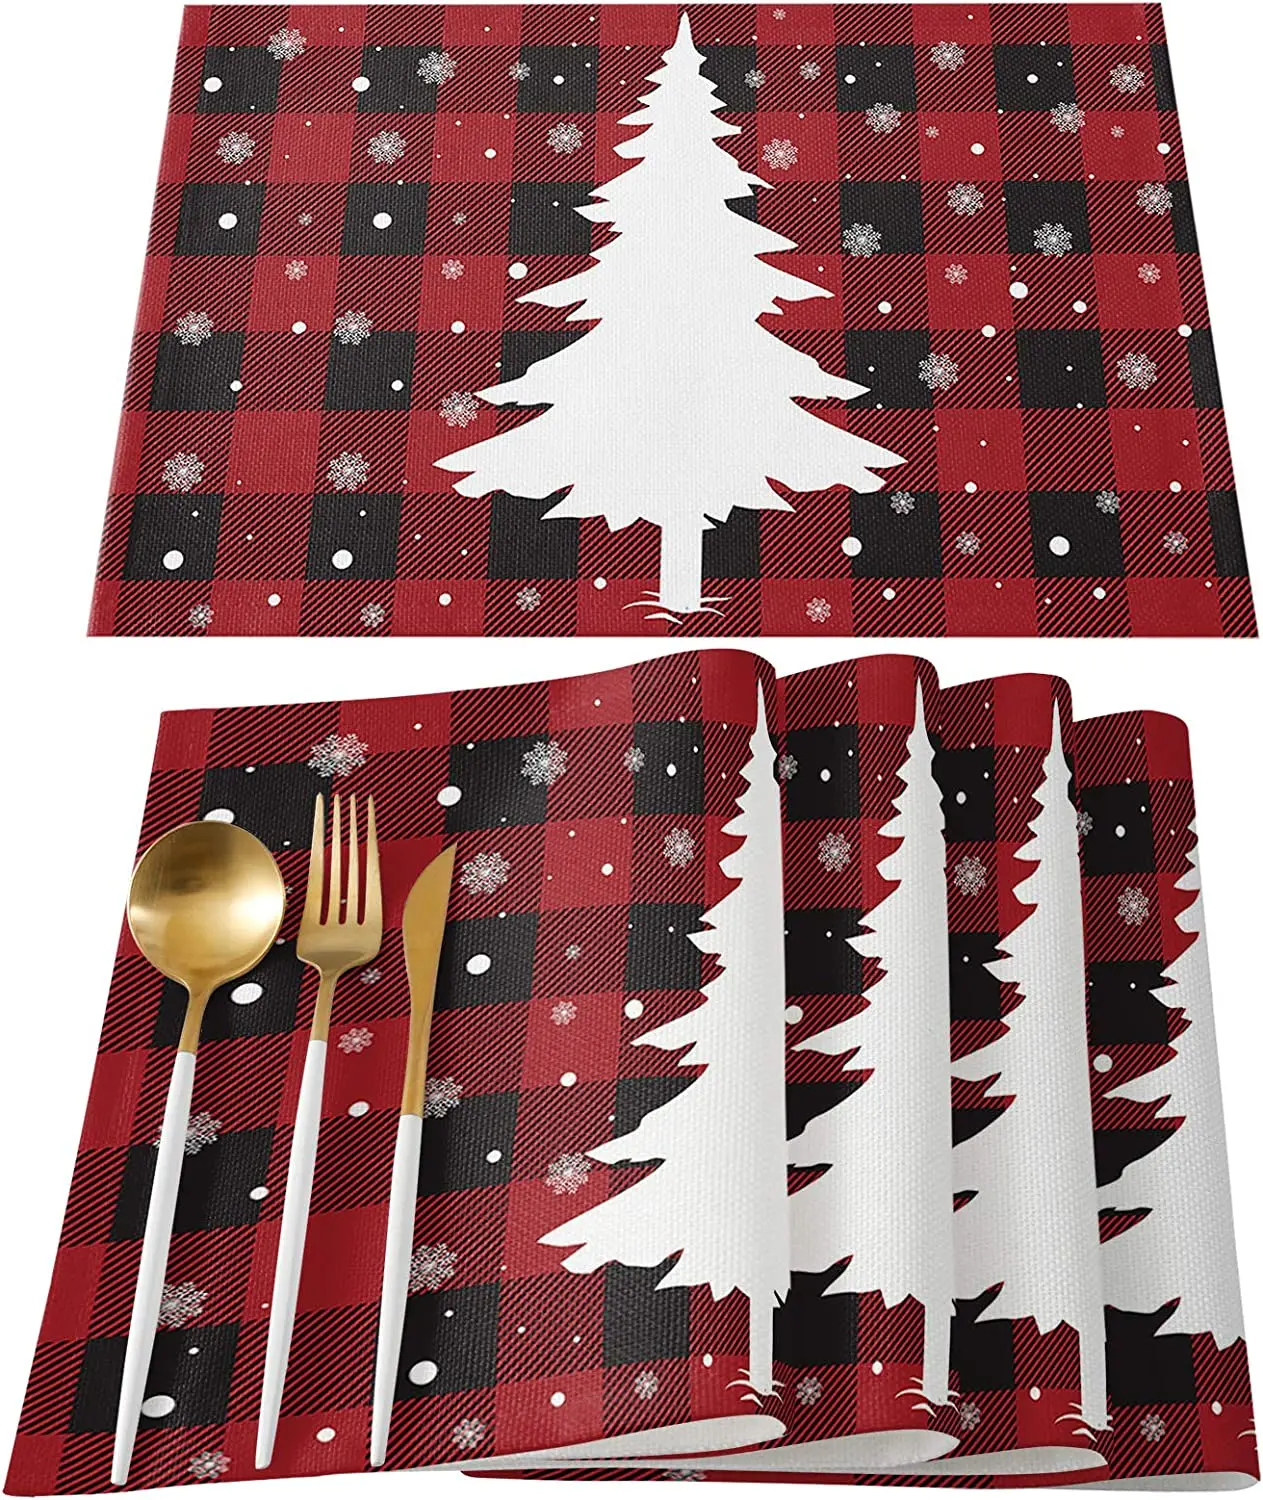 

Merry Christmas Tree Placemats Set of 4 Heat Resistant Table Mats Non Slip Washable Snowflake Red Black Buffalo Plaid Placemat